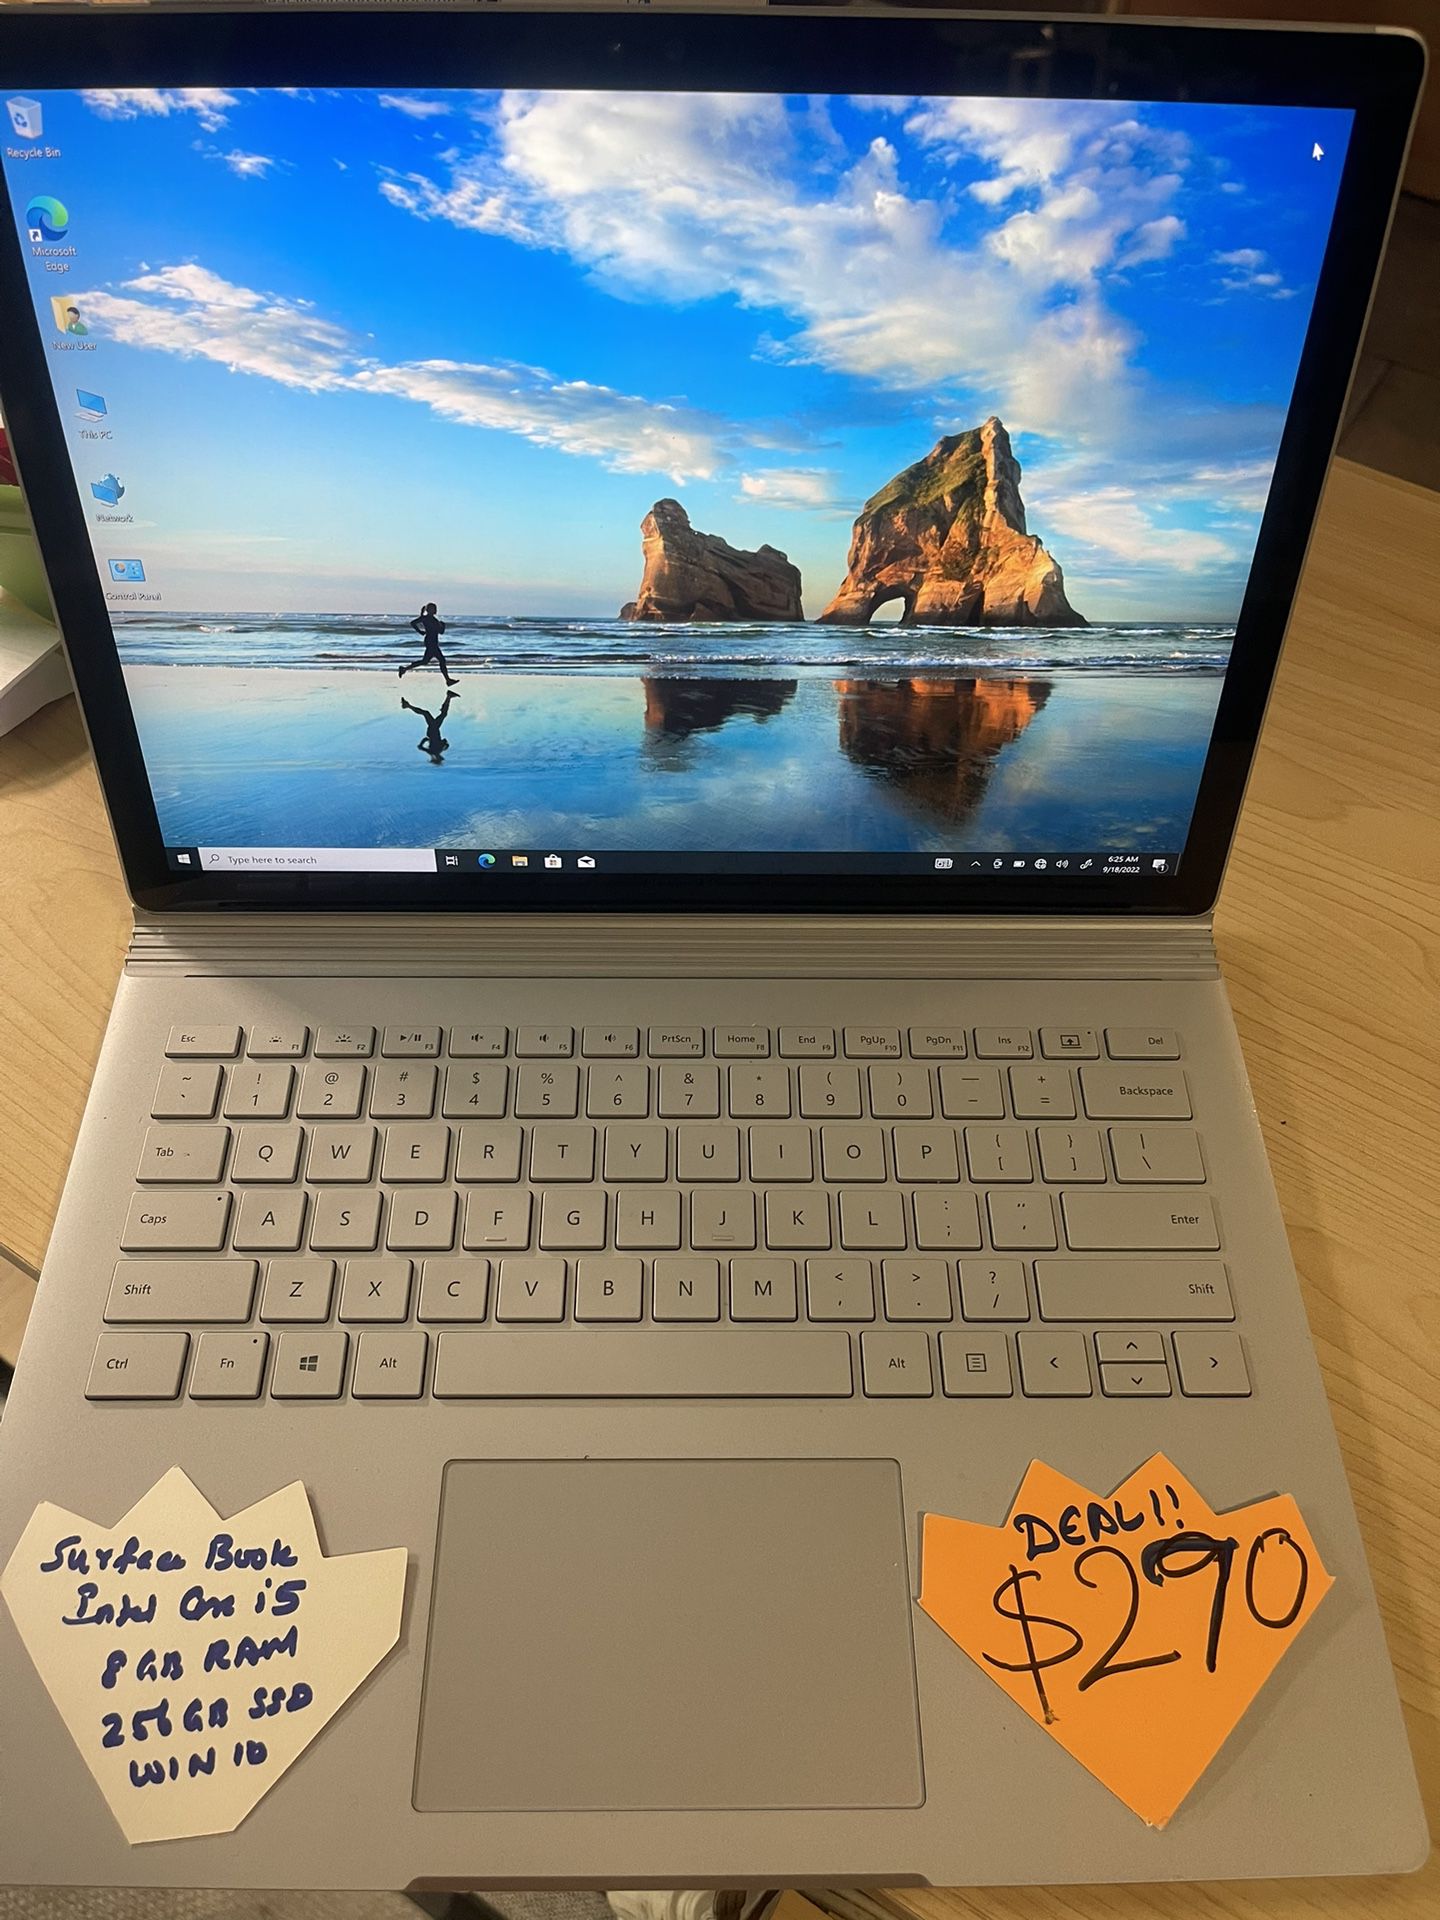 Microsoft Surface Book in Excellent Condition- Intel Core i5 8gb Ram 128gb SSD , Windows 10 Office 